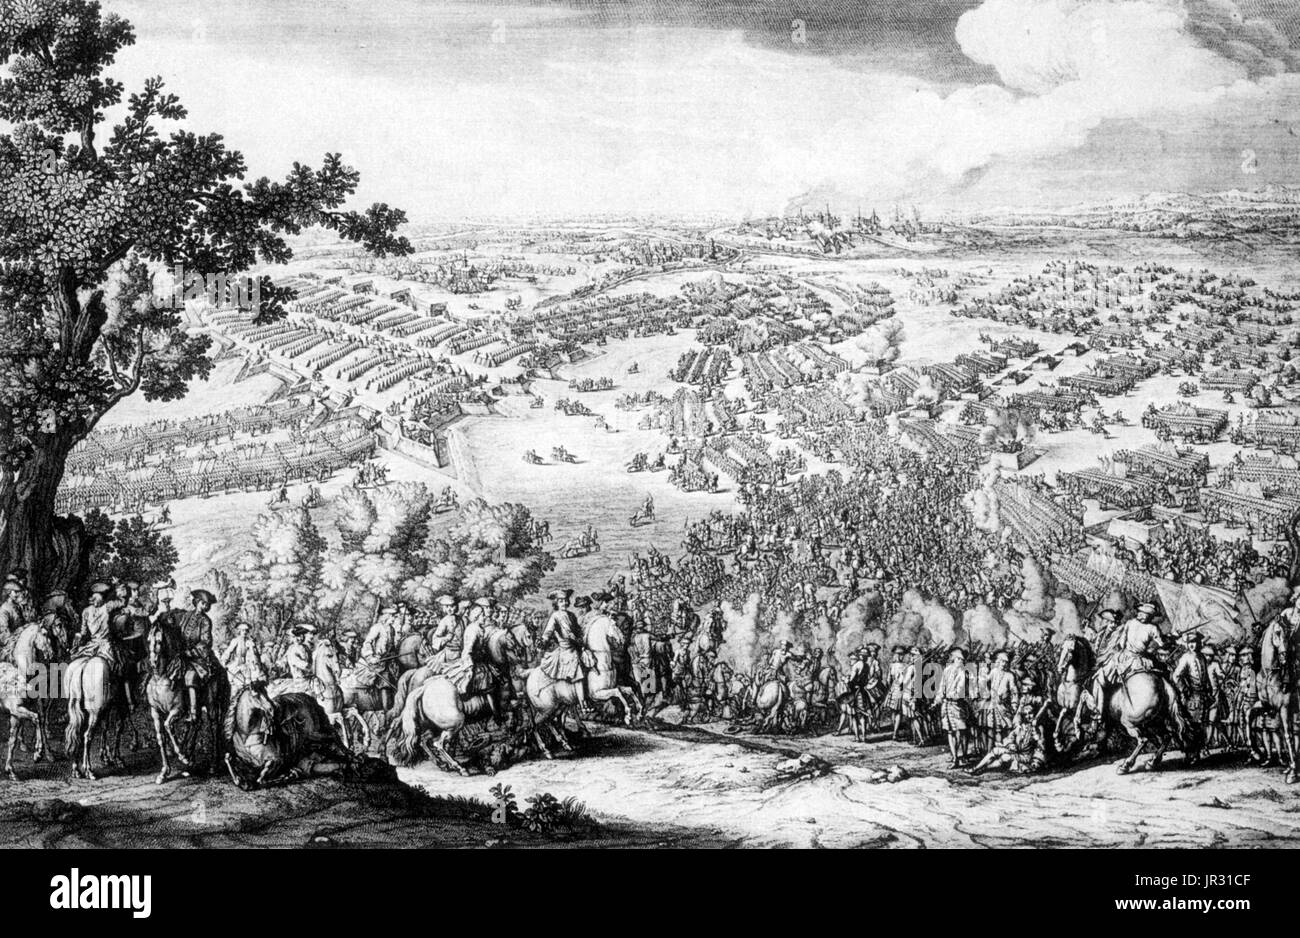 The Battle of Poltava on July 8, 1709 was the decisive victory of Peter I of Russia over the Swedish forces under Field Marshal Carl Gustav Rehnskiöld, in one of the battles of the Great Northern War. High-ranking Swedes captured during the battle included Field Marshal Rehnskiöld, major generals Schlippenbach, Stackelberg, Hamilton and Prince Maximilian Emanuel. Peter held a celebratory banquet in two large tents erected on the battlefield. The battle also bears major importance in Ukrainian national history, as Hetman of Zaporizhian Host Ivan Mazepa sided with the Swedes, seeking to create a Stock Photo